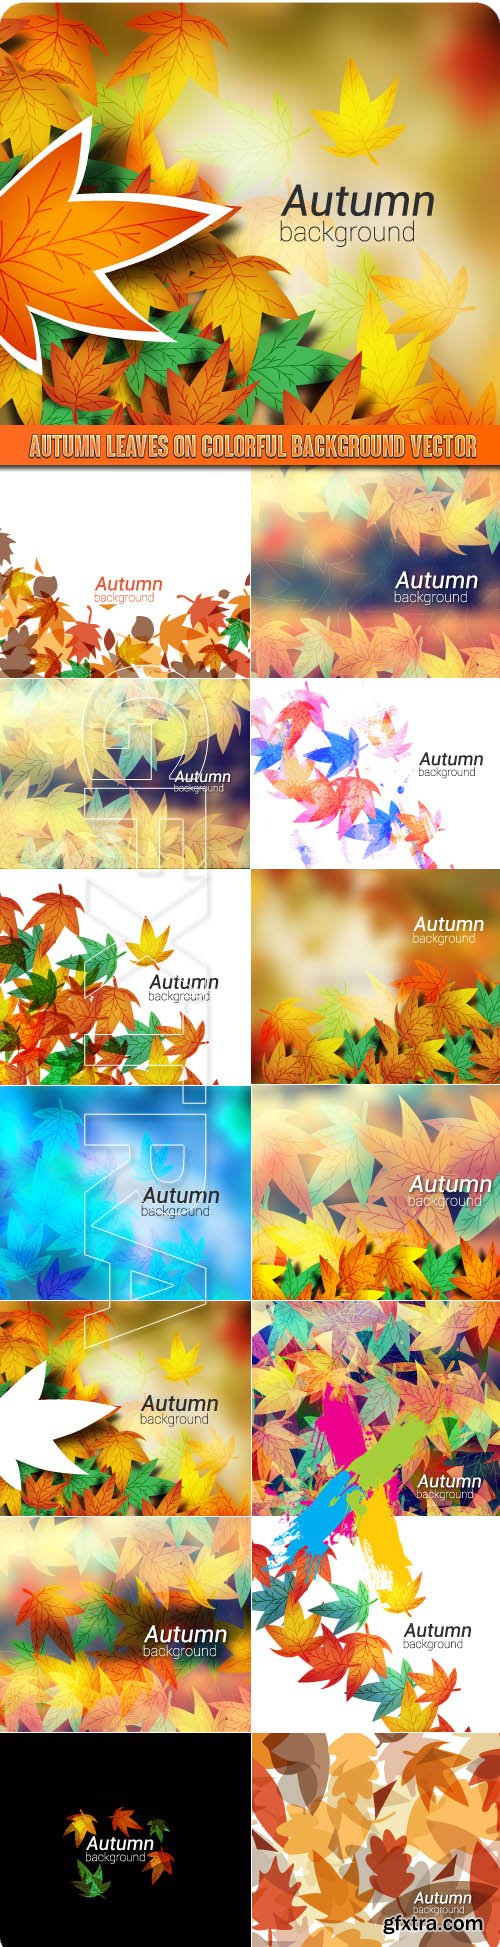 Autumn leaves on colorful background vector